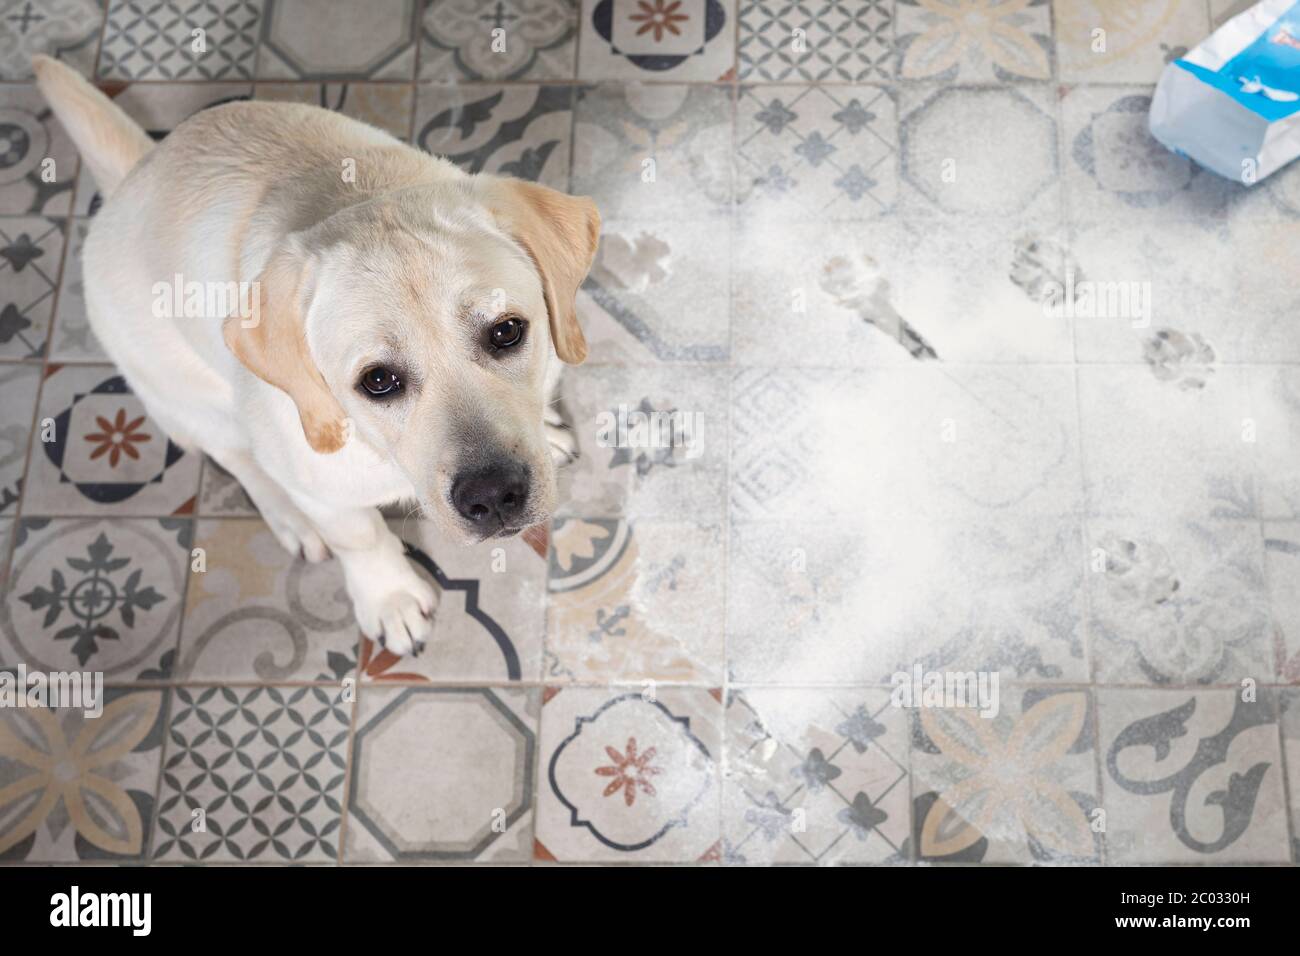 Labrador dog looking with guilty expression, sitting next to inverted packet of flour sprinkled on floor. Stock Photo